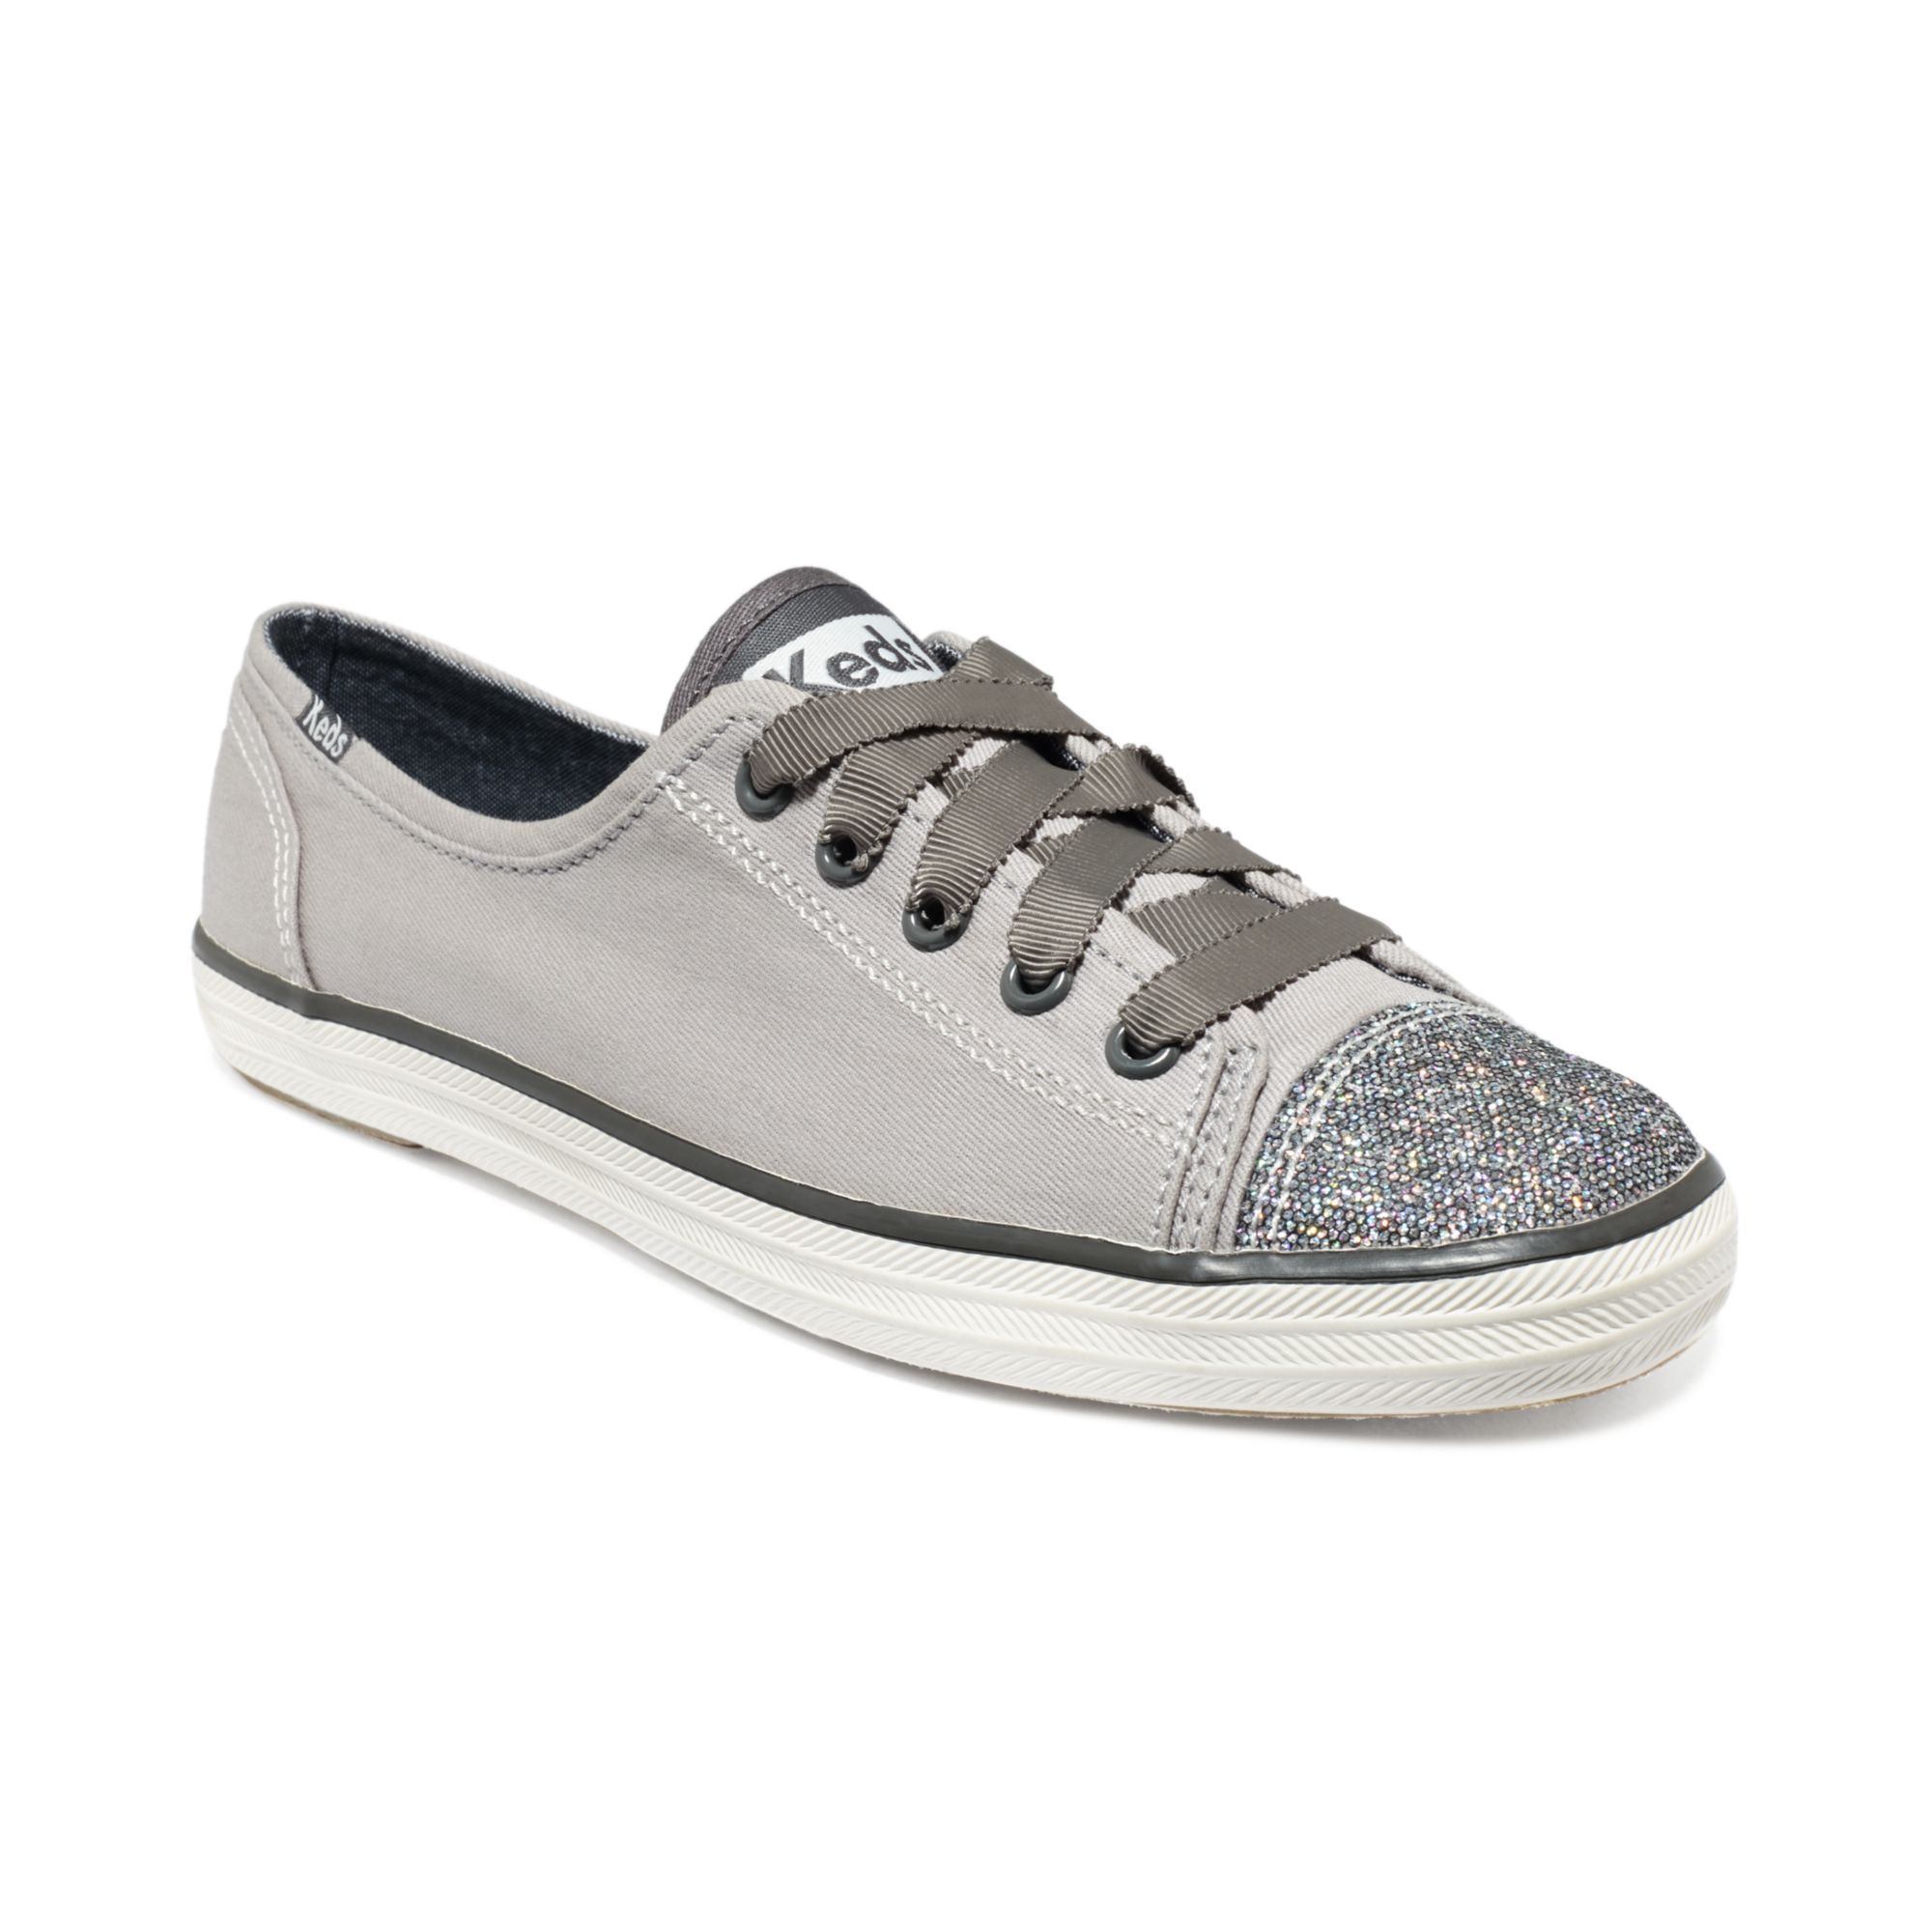 Lyst - Keds Rally Glitter Toe Sneakers in Gray